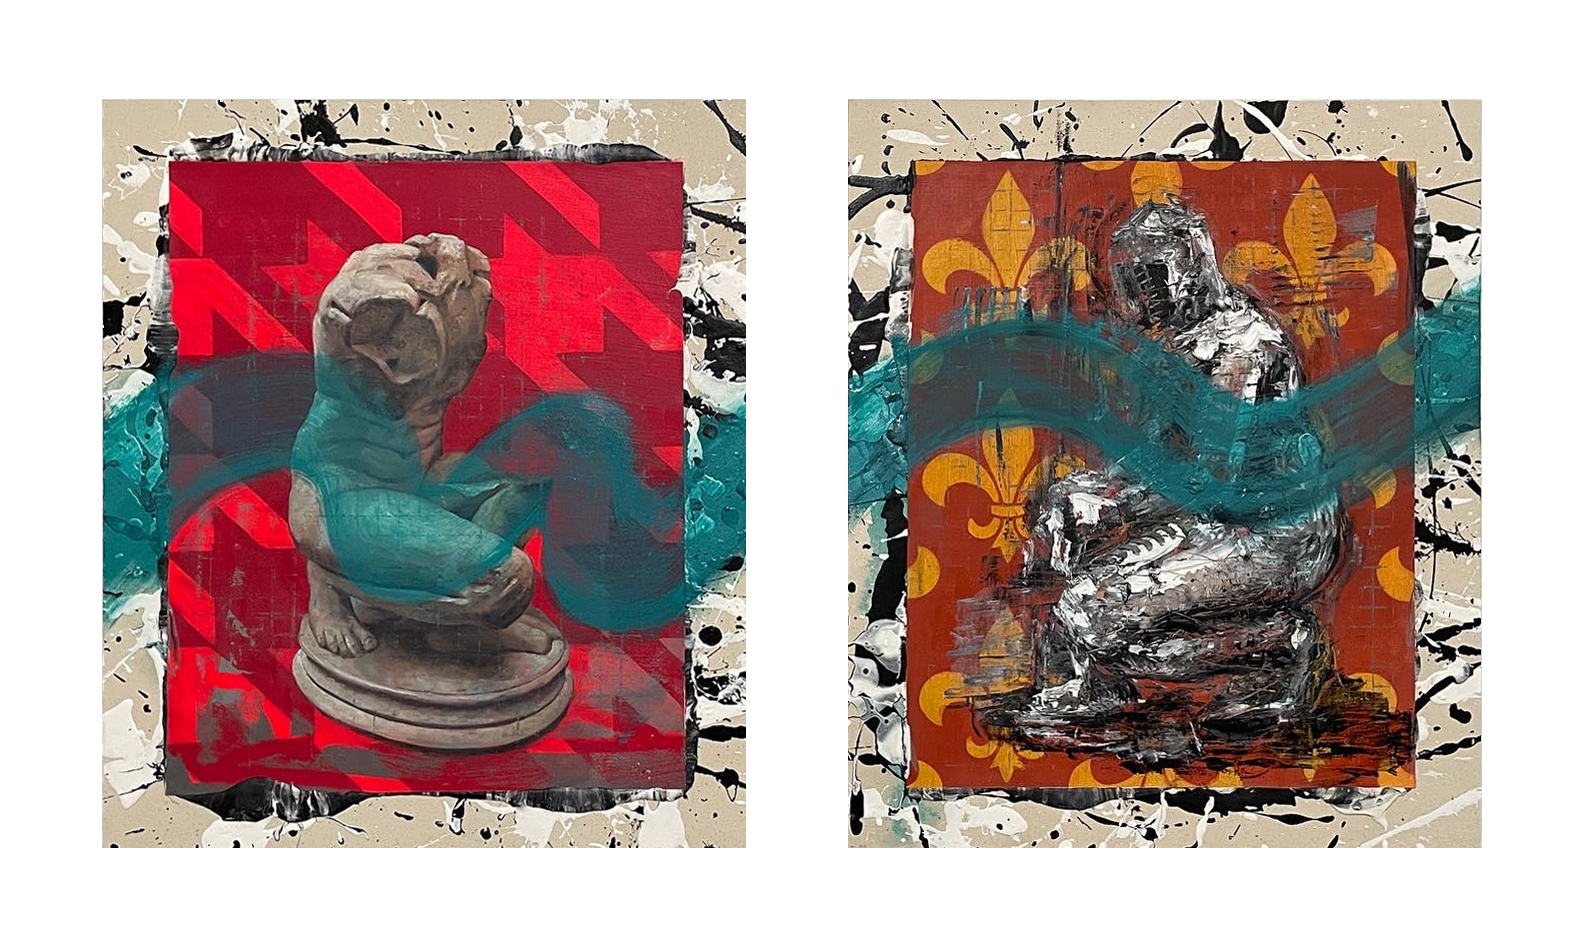 Donald Keefe, Post-Antiquities (Diptych), 2022, oil, acrylic, paper on canvas over panel, 24” x 20” per panel